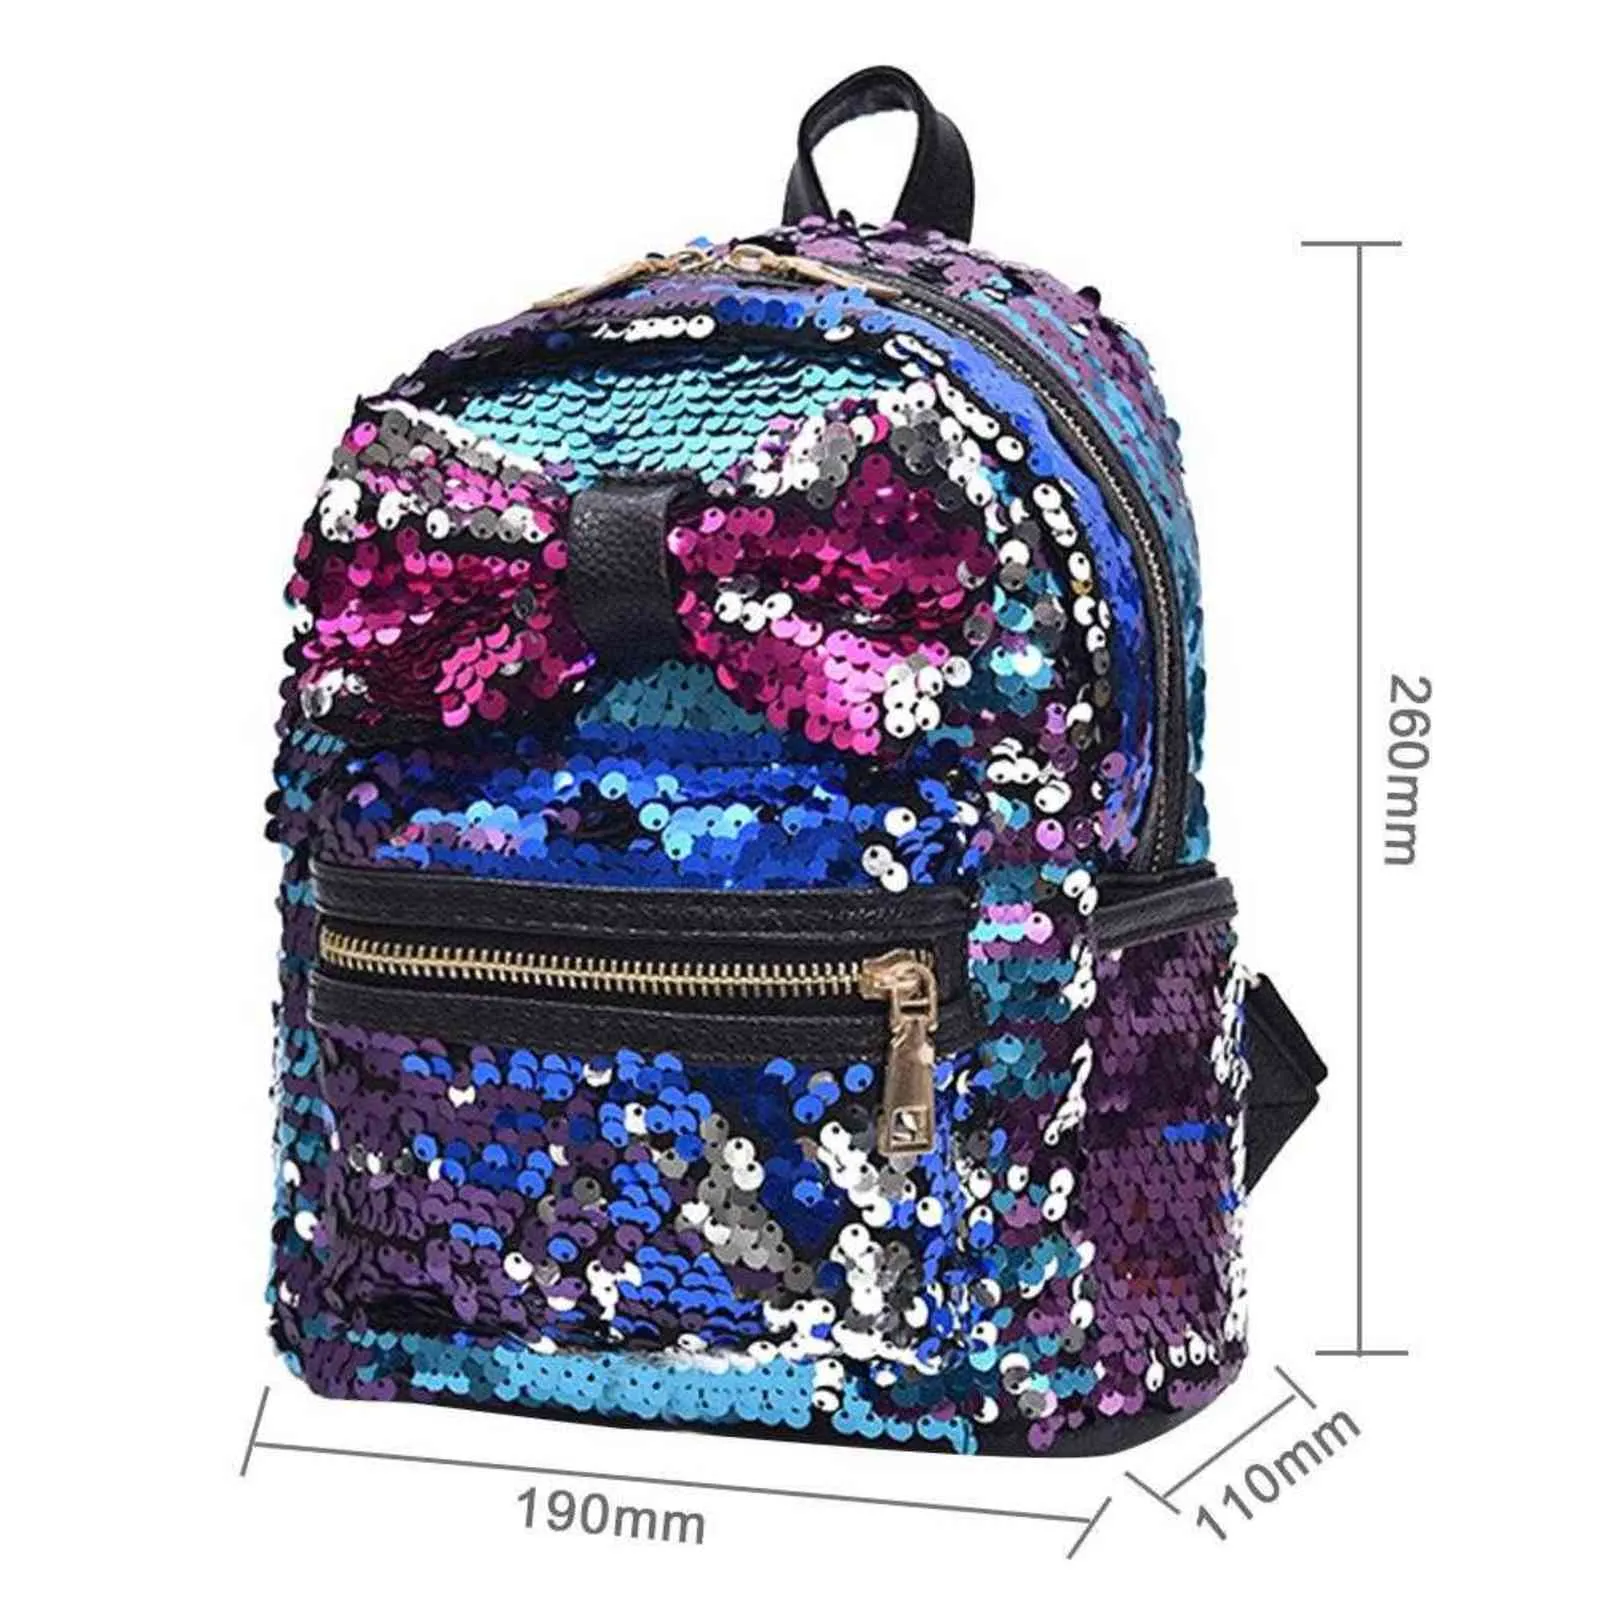 Shining Sequins Bowknot Backpack For Teenage Girls Shoulder Bags Women Cross Body Bag Small Hand Bag Party Purse Y1105